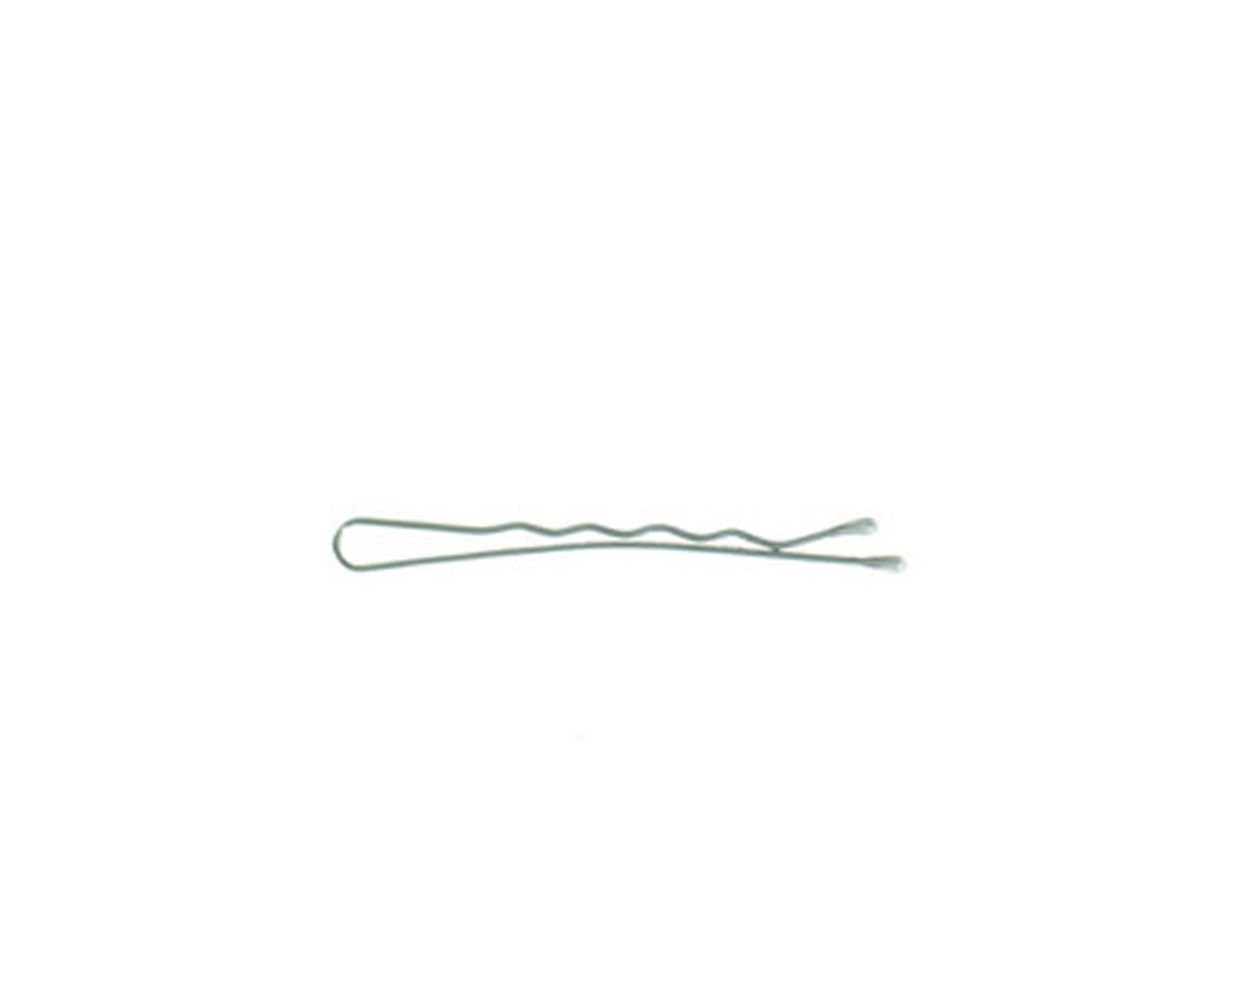 BaByliss Bobby Pins Silver 1/2